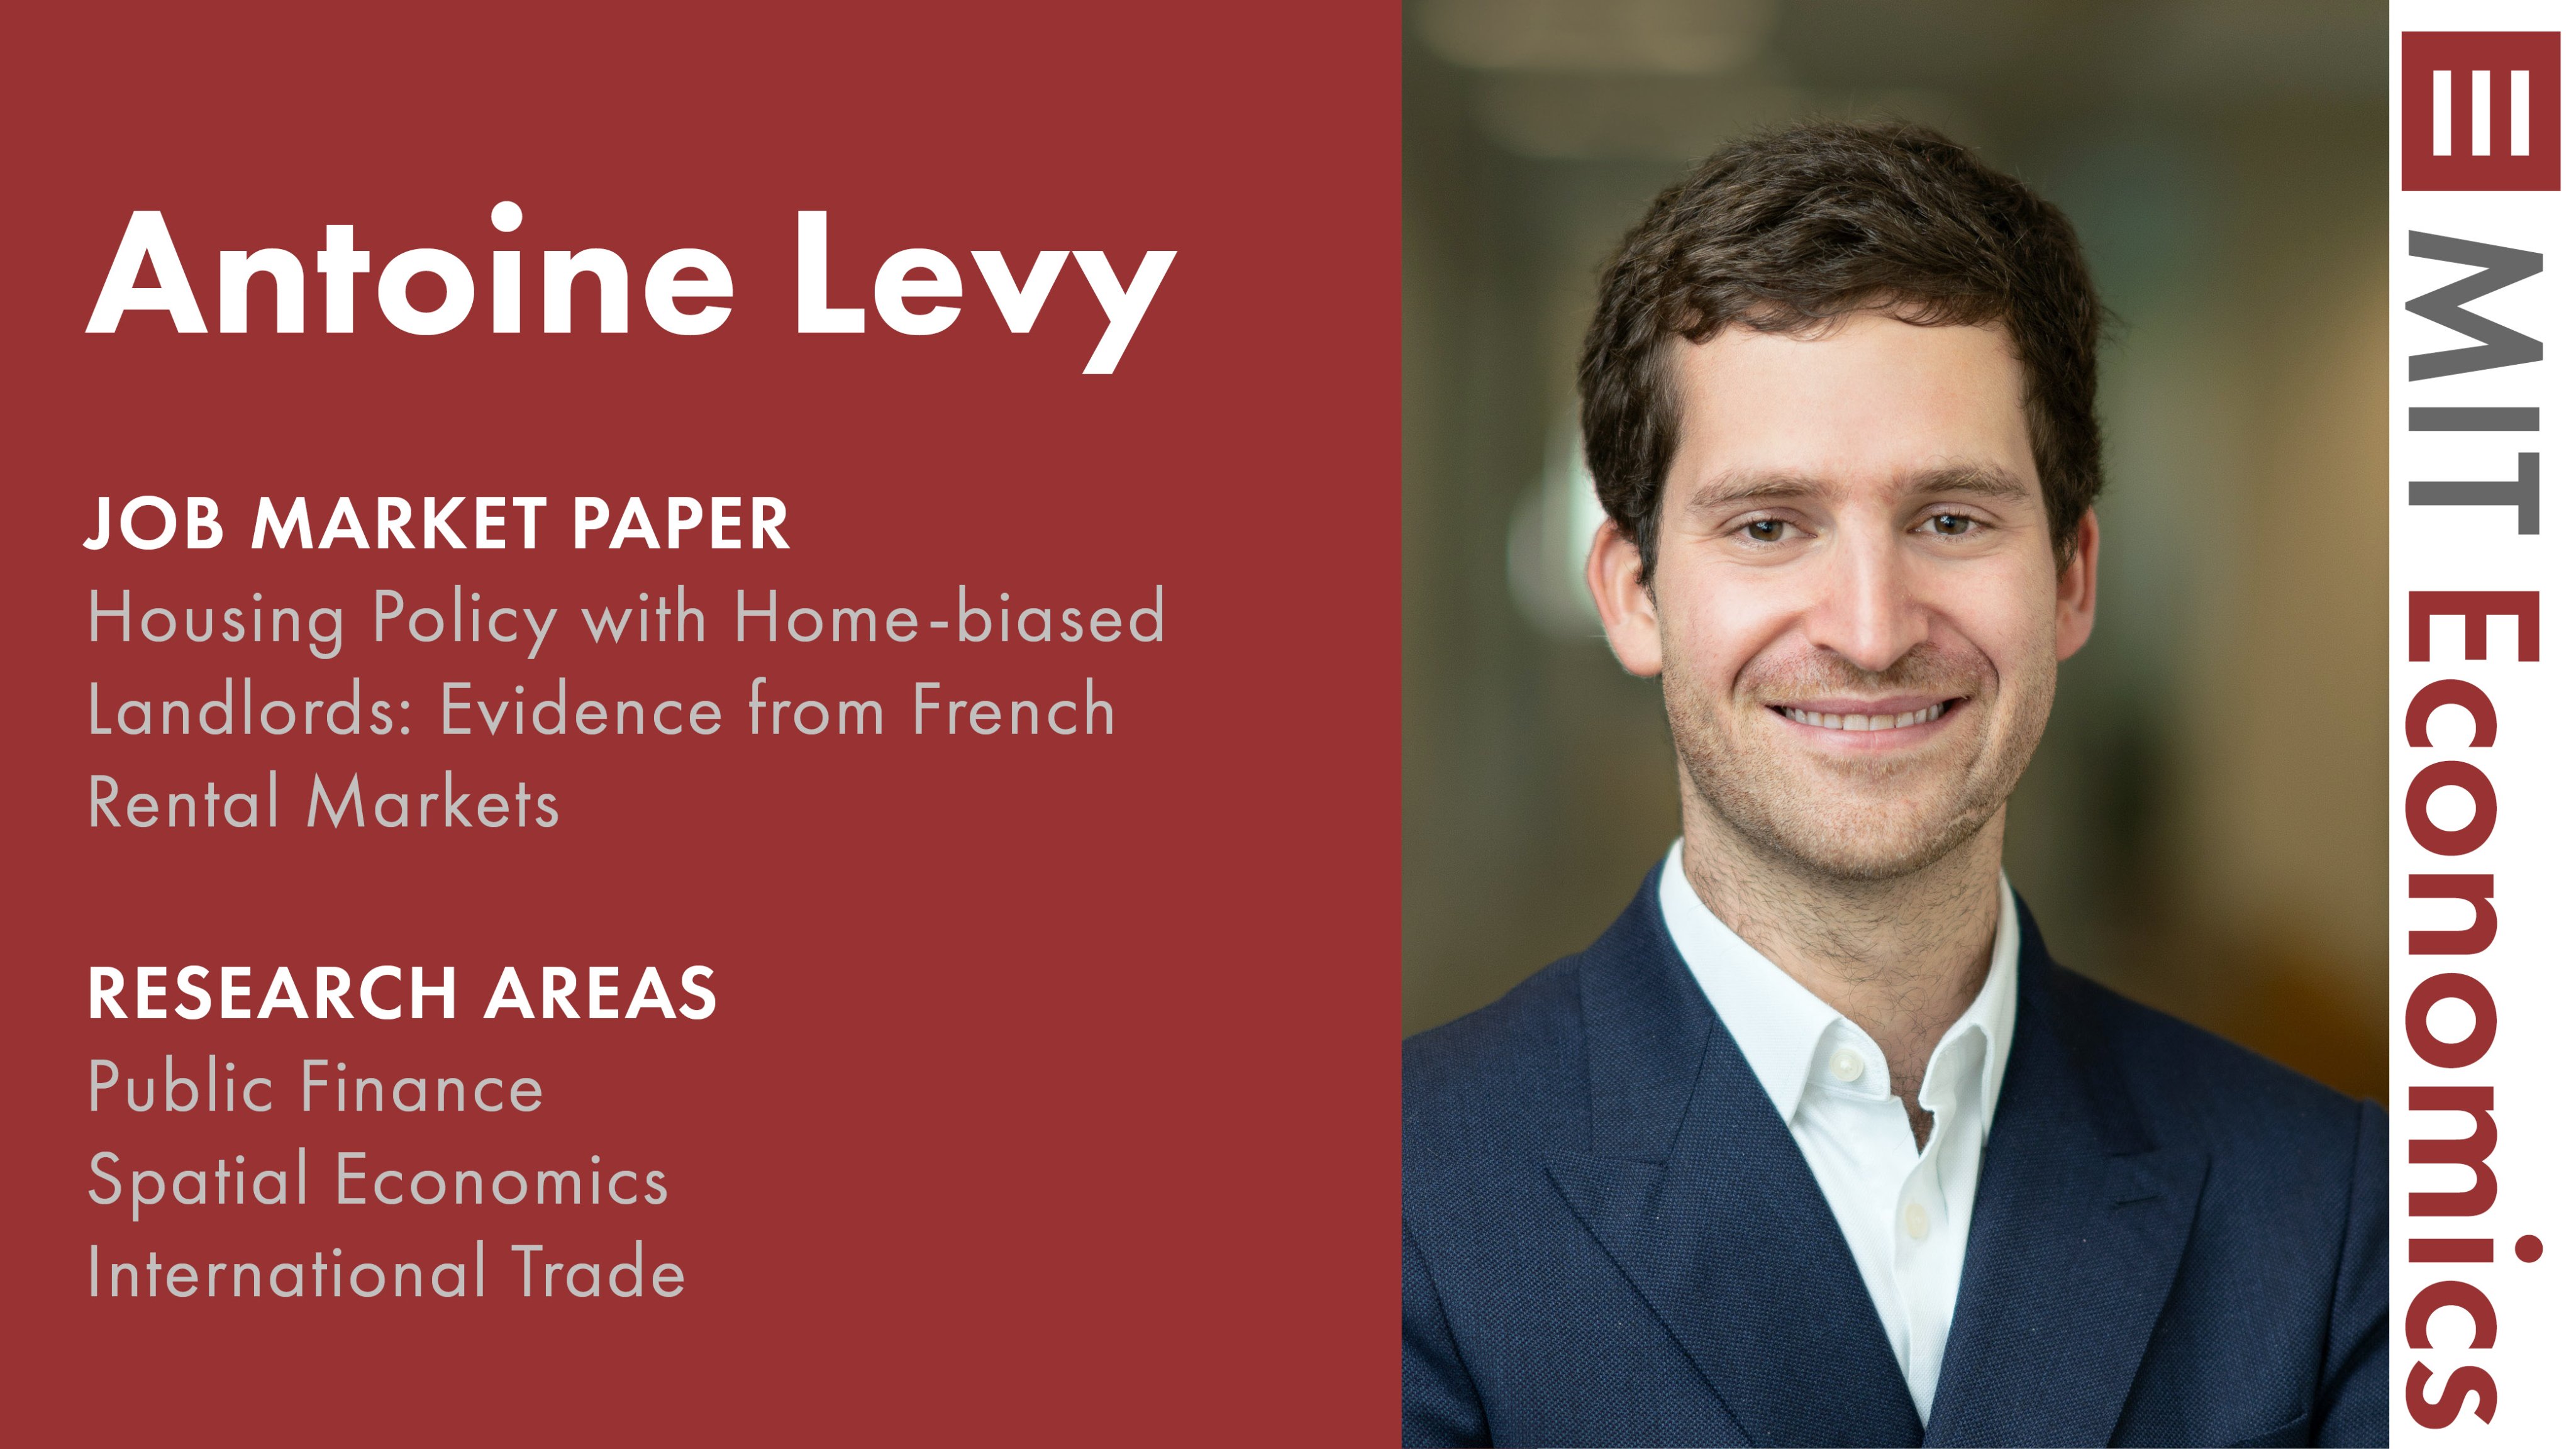 MIT Economics on Twitter: "Antoine Levy's research include Public Finance, Spatial Economics, and International Trade. Learn more at https://t.co/TQxCCVsRl6 Twitter